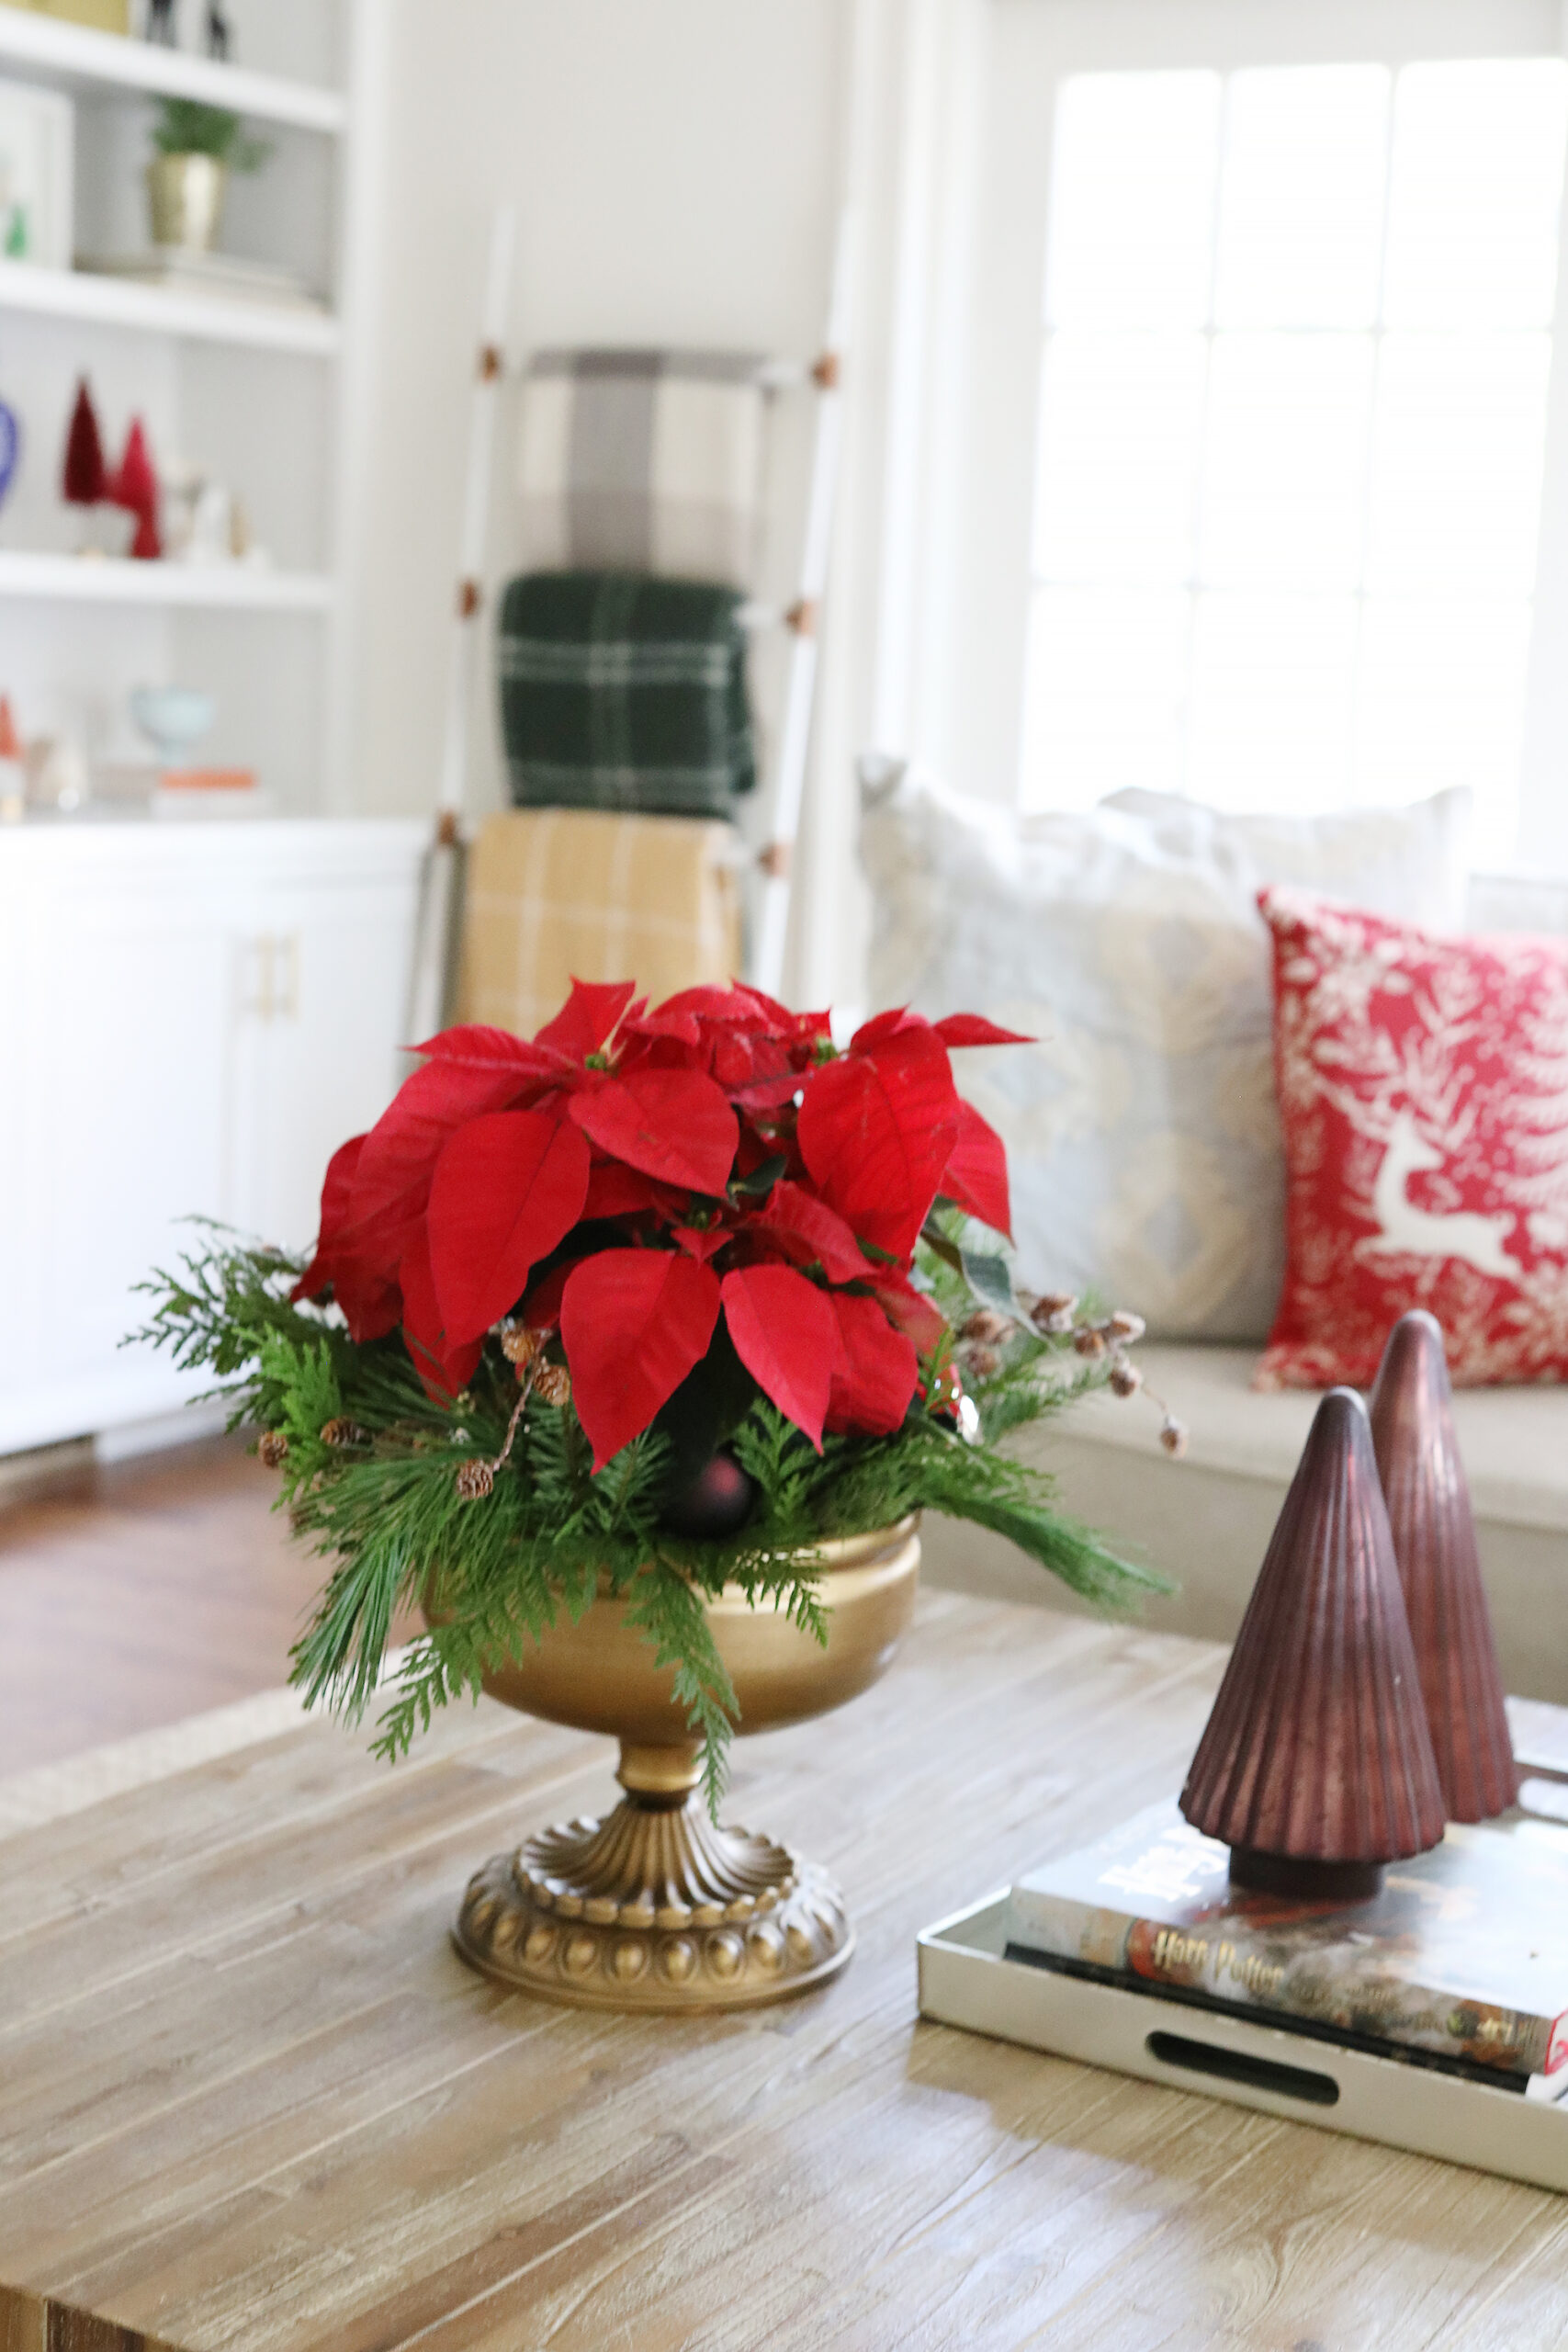 New Years' sales 2020: Save on holiday decor for next Christmas at  retailers like Wayfair, Home Depot, and more